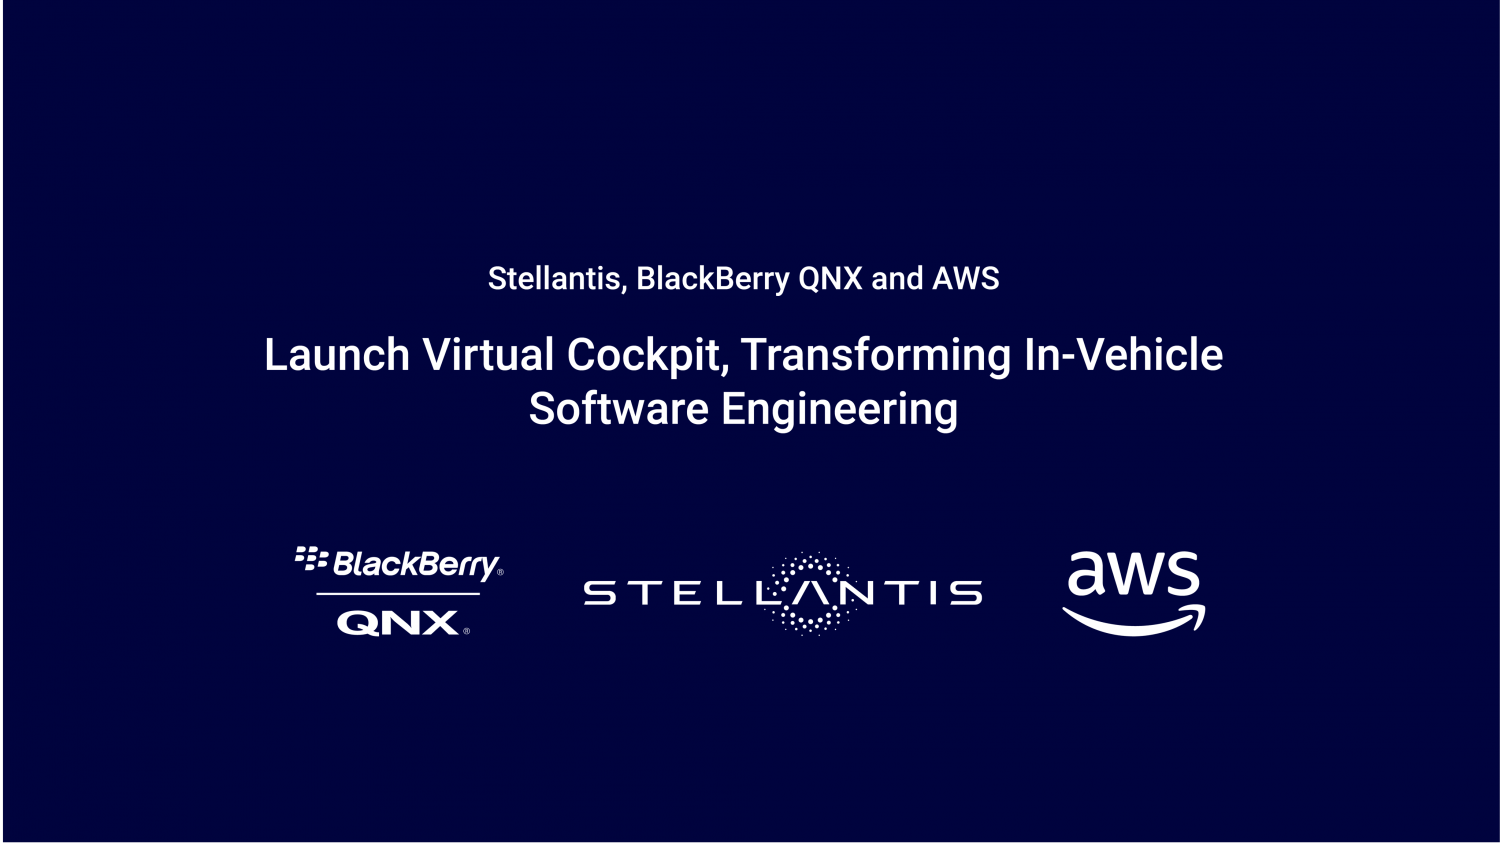 Stellantis, BlackBerry QNX and AWS Launch Virtual Cockpit, Transforming In-Vehicle Software Engineering